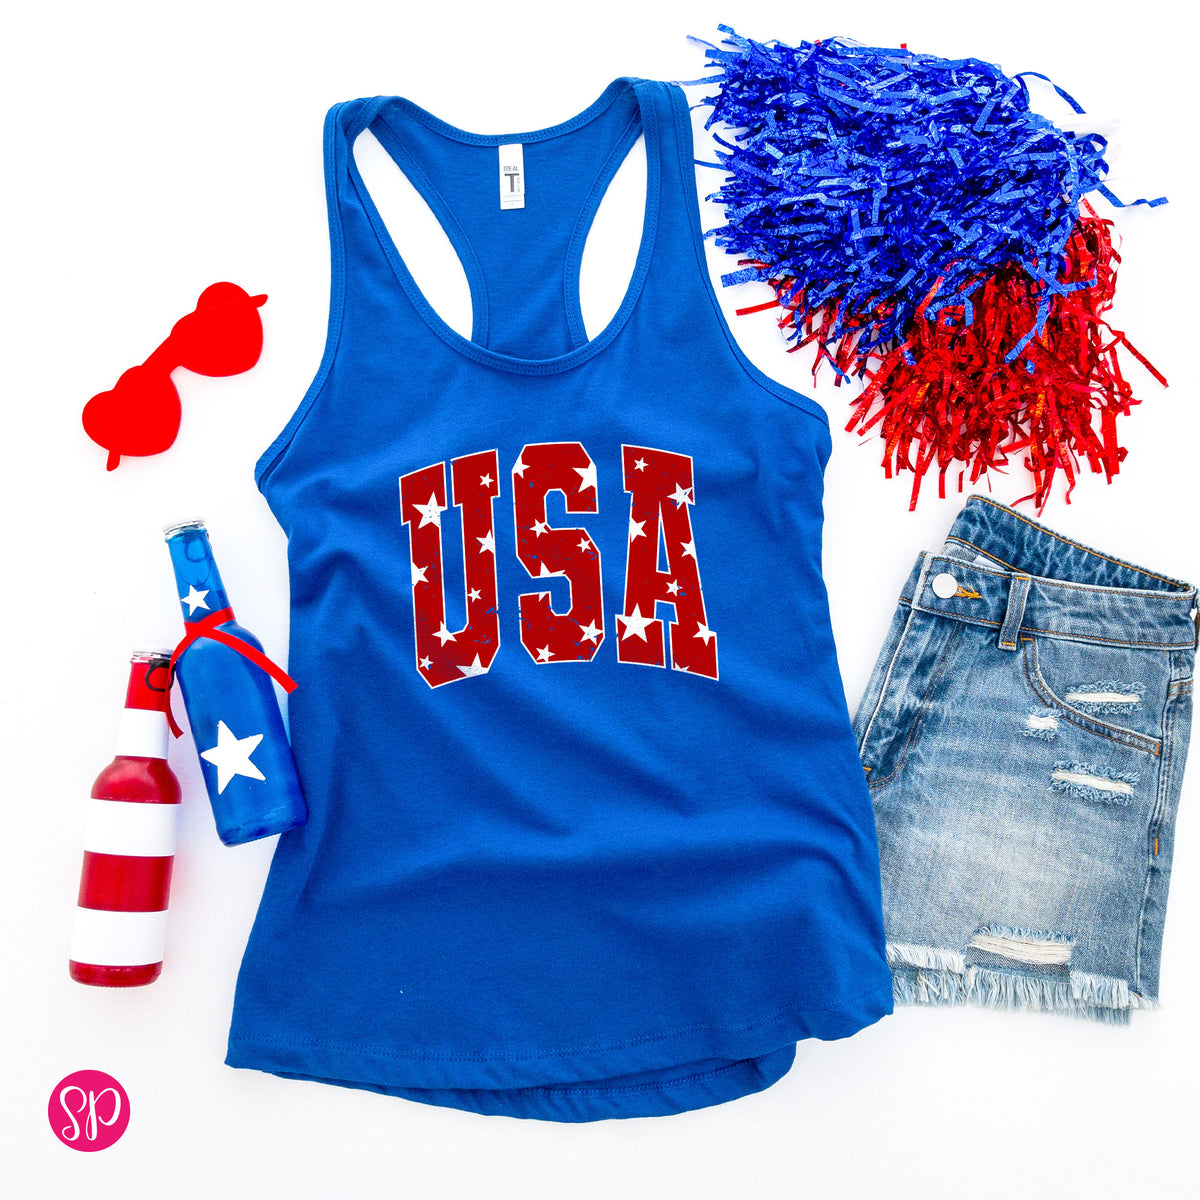 Distressed USA with Stars Tank Top